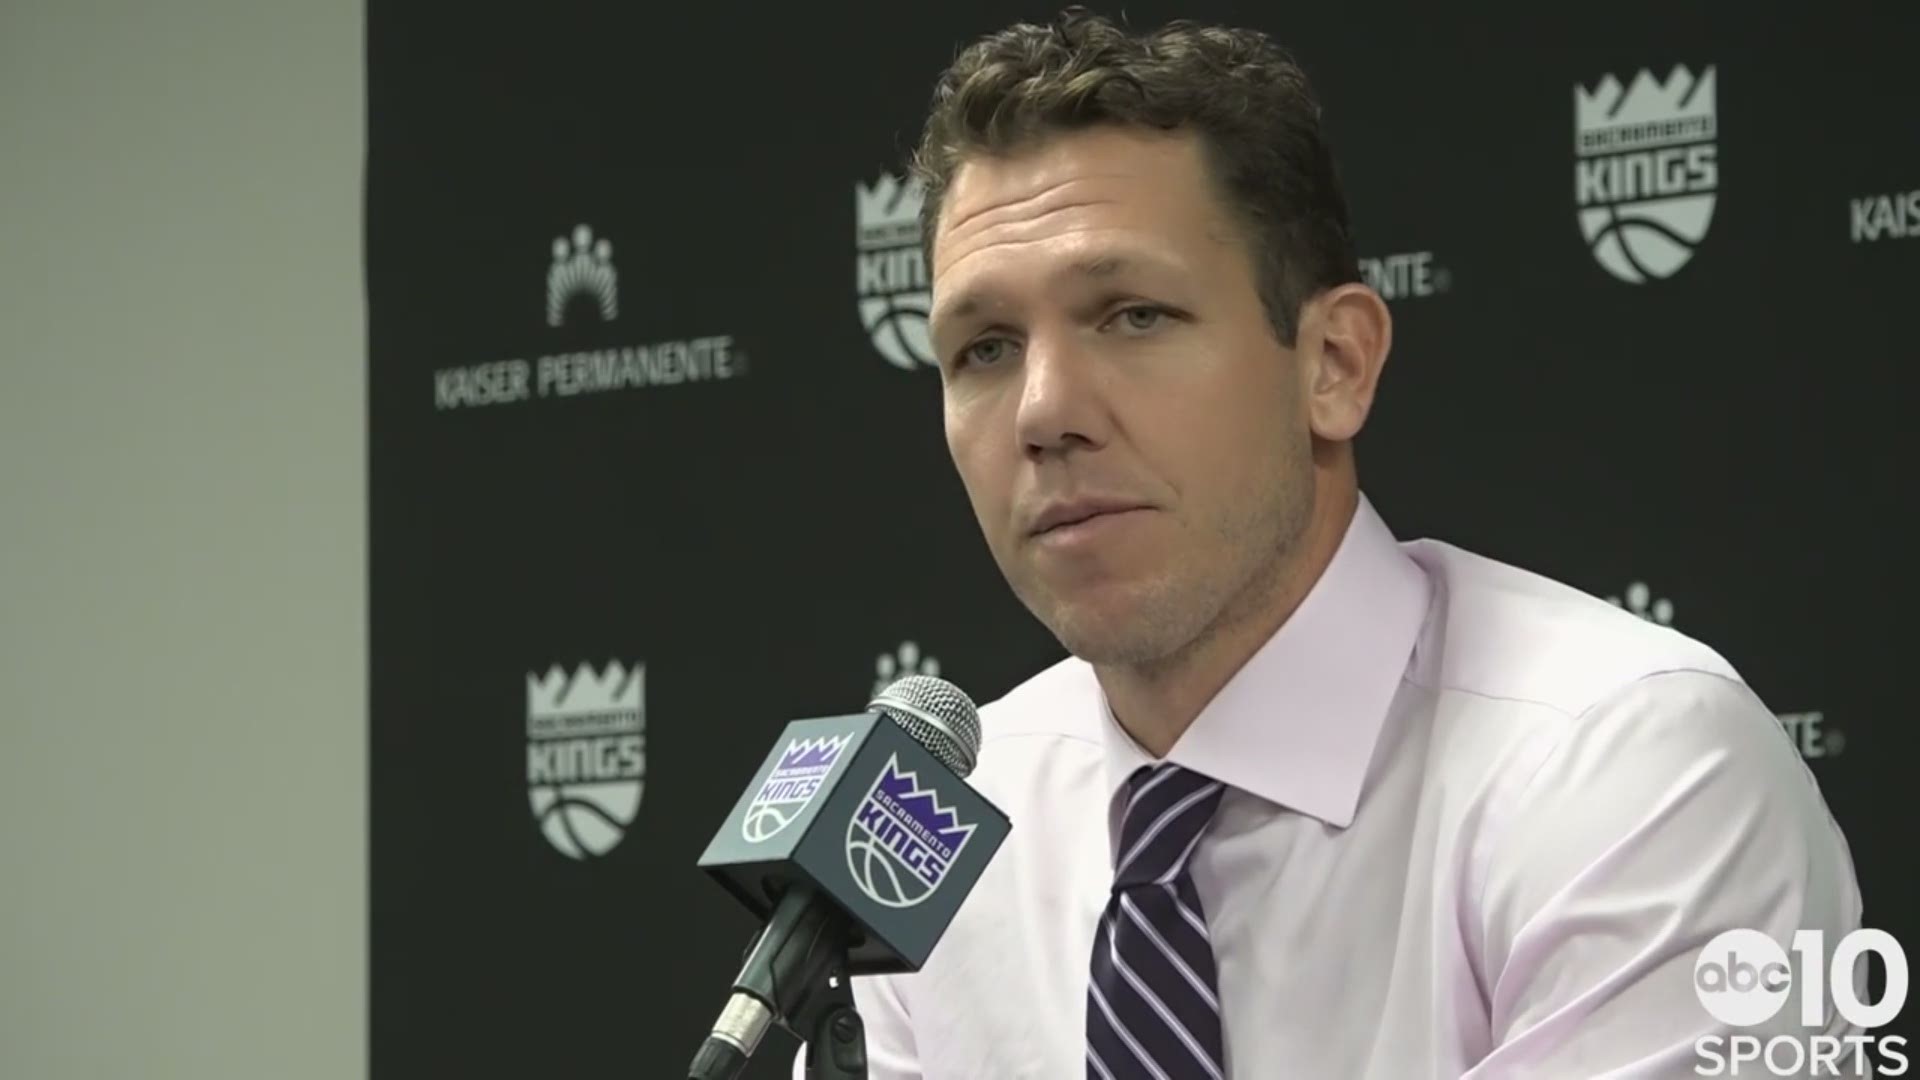 Kings coach Luke Walton analyzes Sacramento's fourth straight loss after being edged by the Denver Nuggets 101-94 on Monday & the spark from Richaun Holmes.